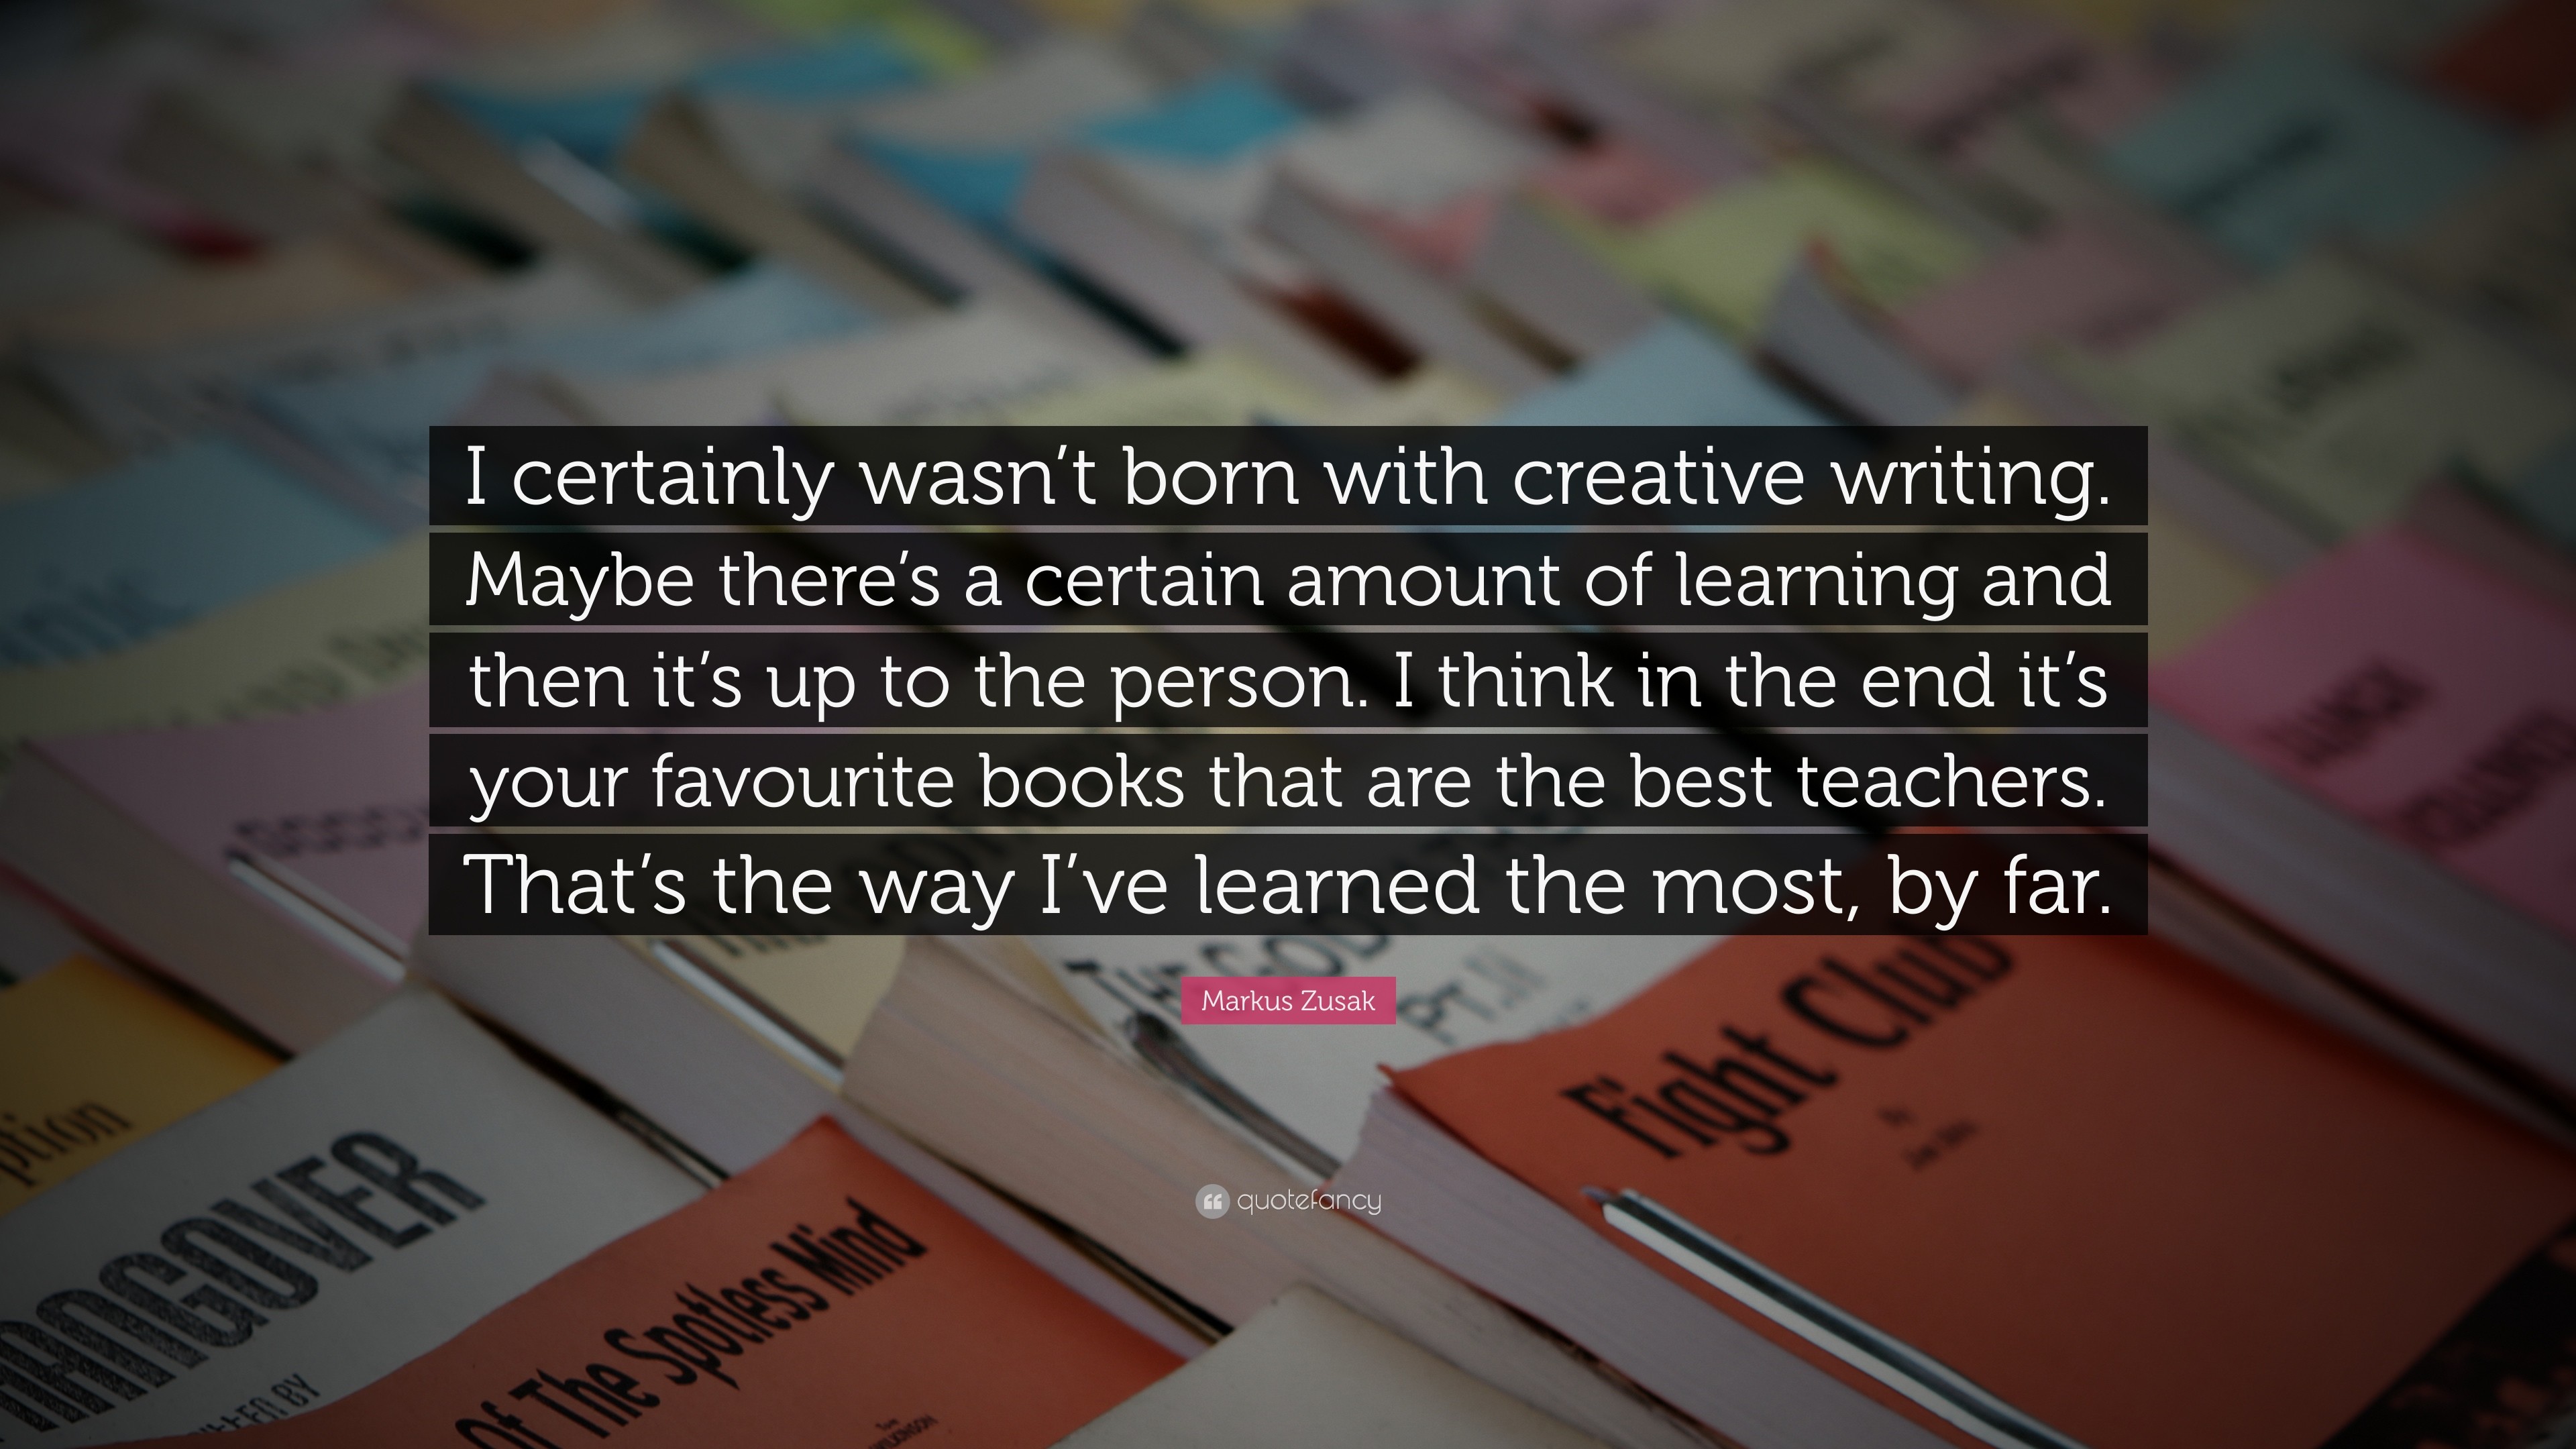 3840x2160 Markus Zusak Quote: “I certainly wasn't born with creative writing. Maybe